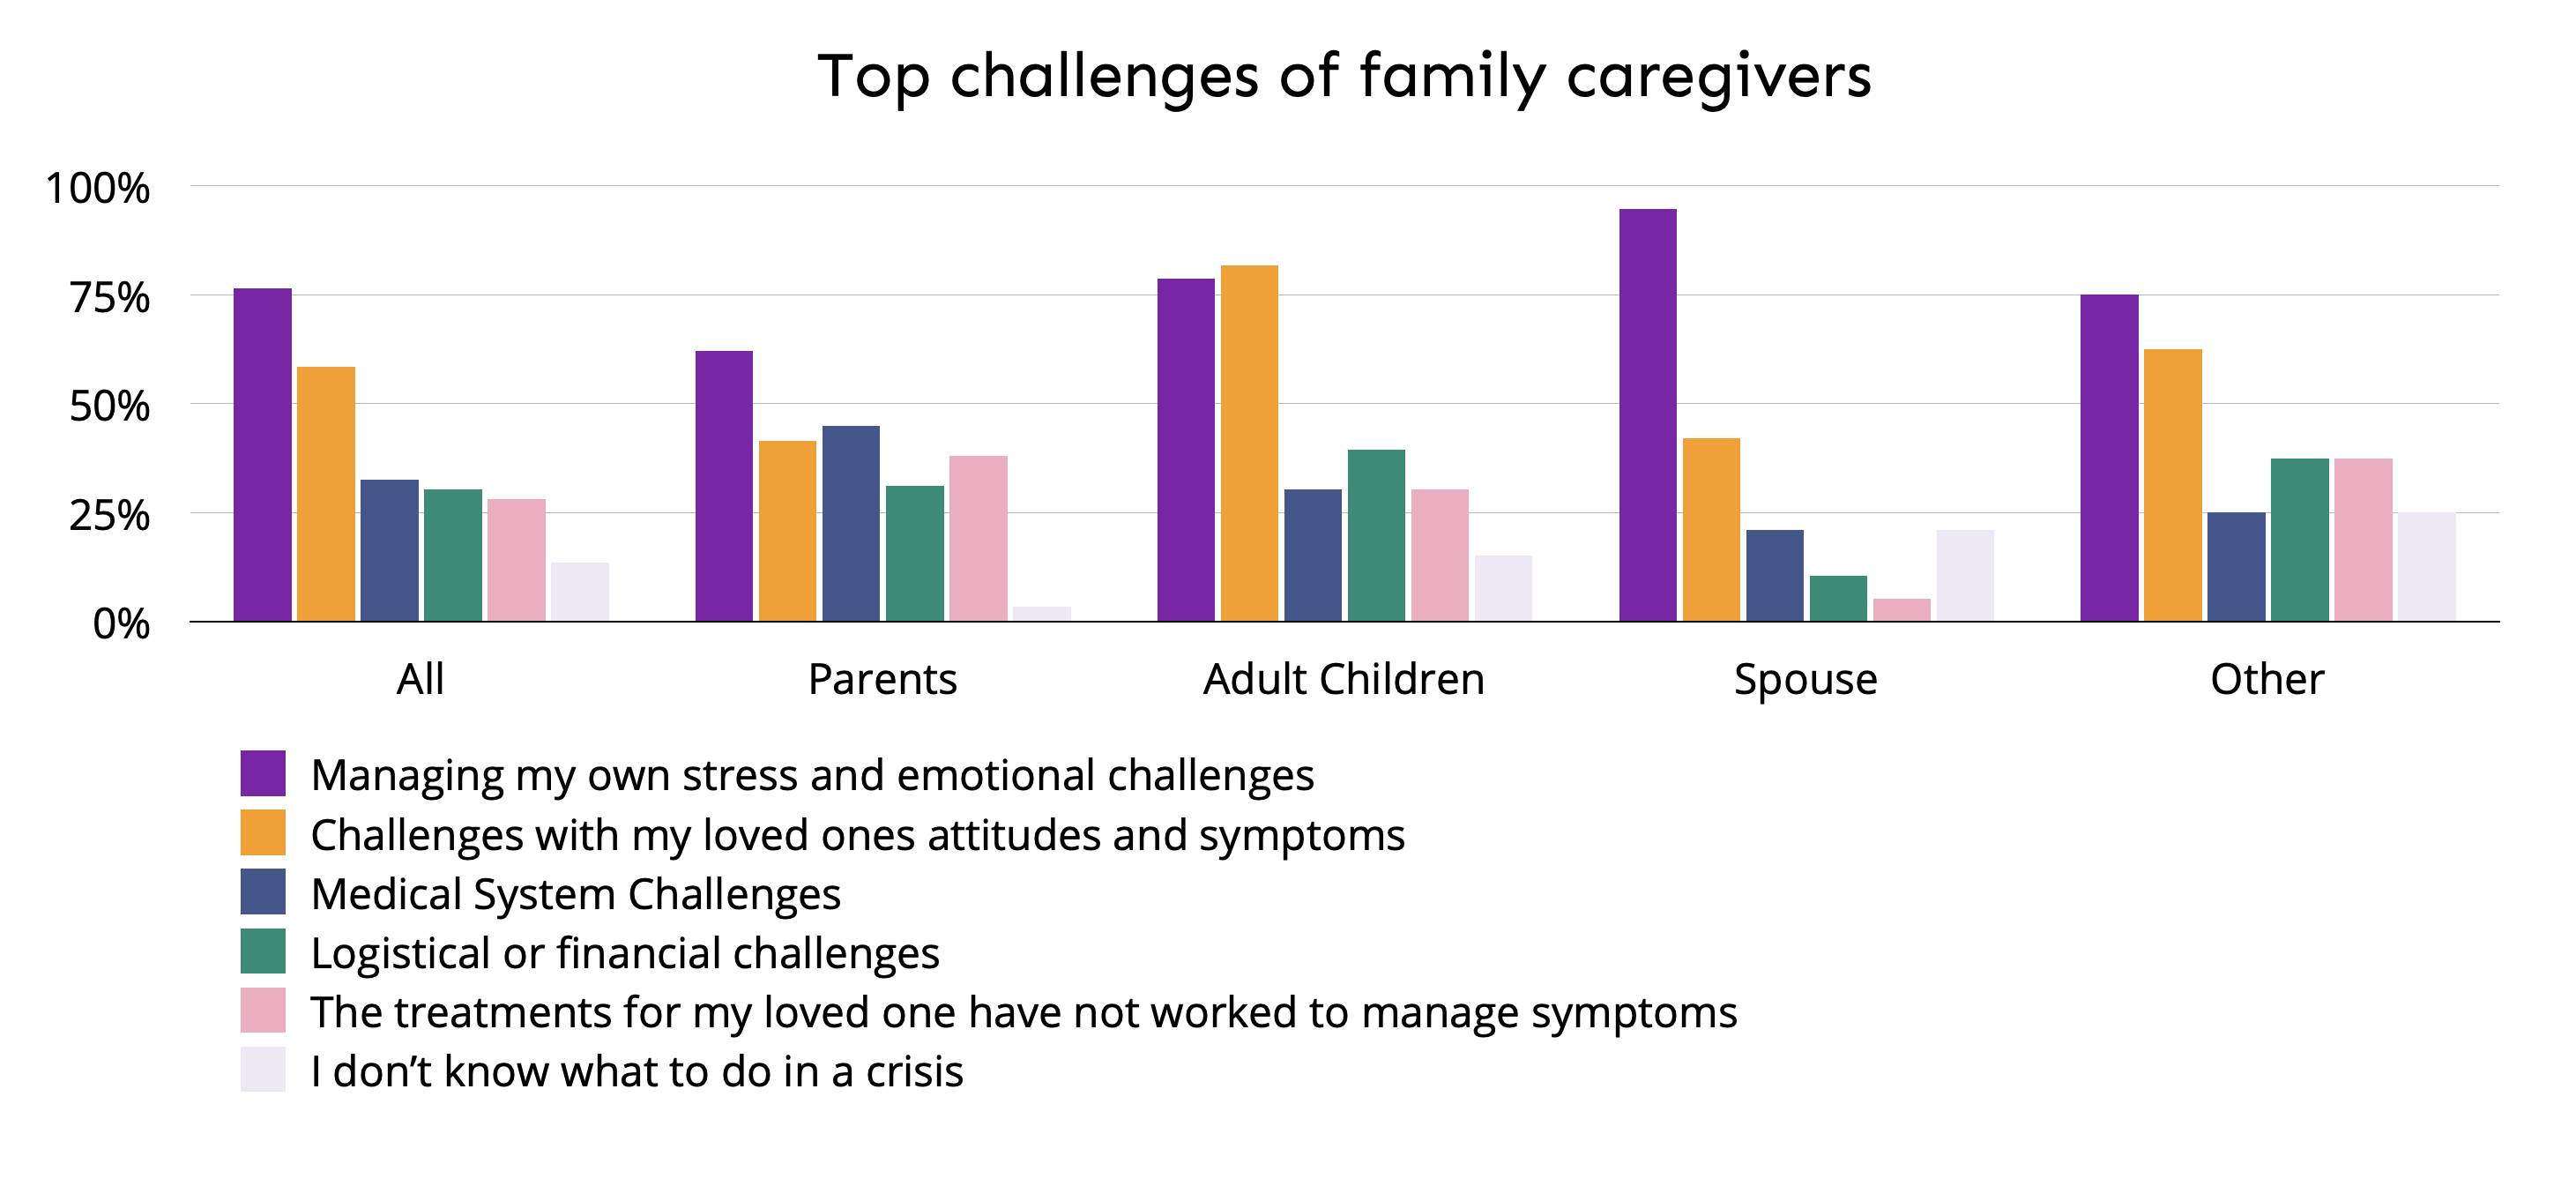 Top caregiver challenges graphic from survey